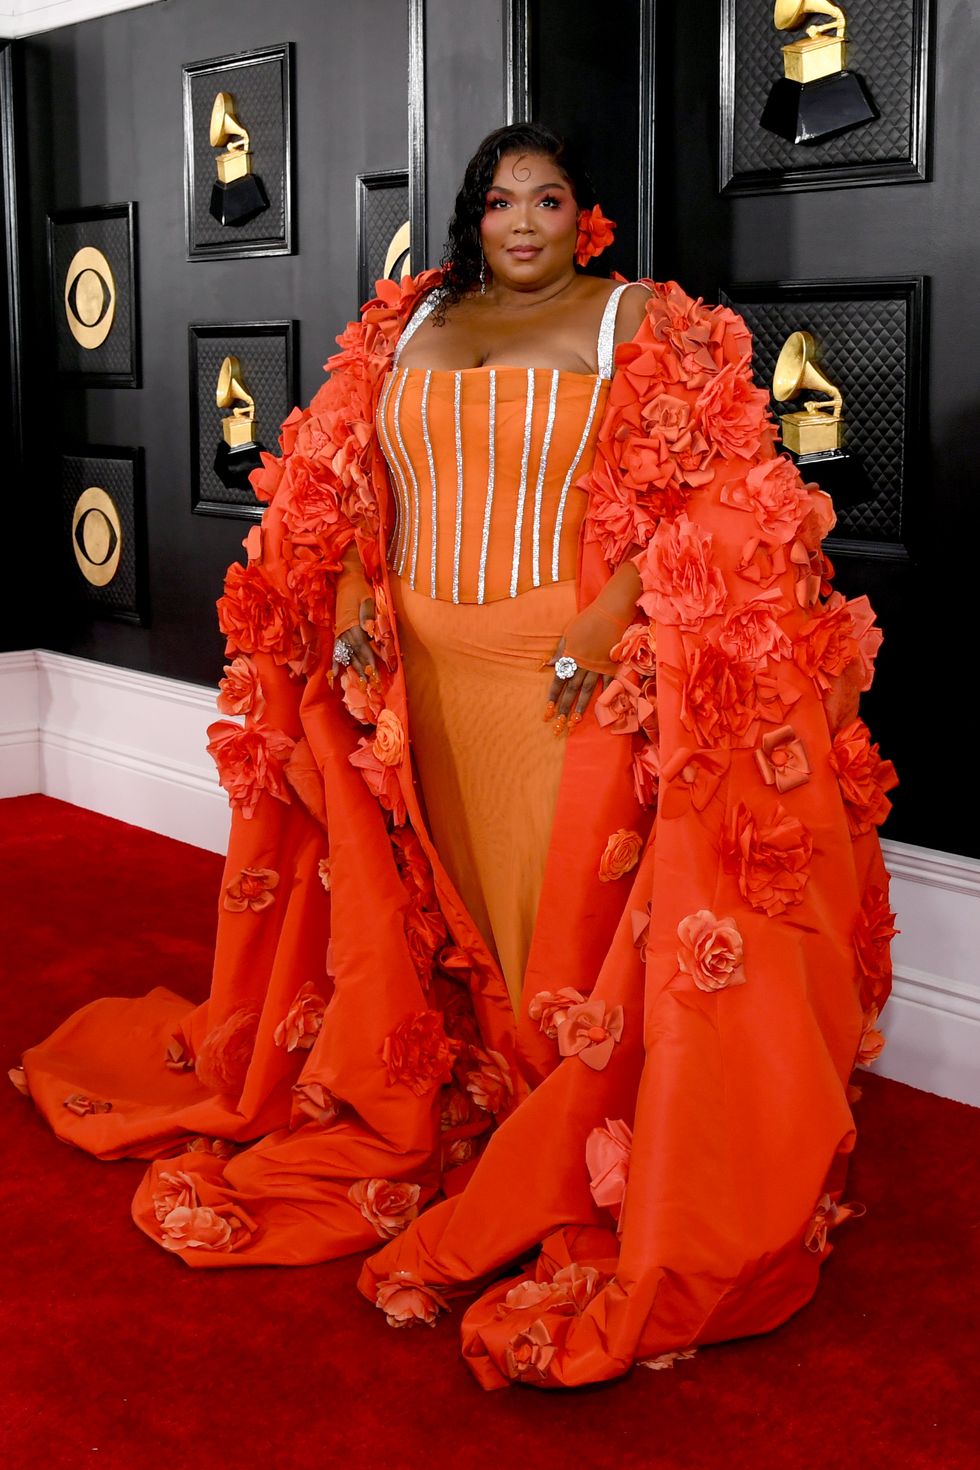 Lizzo Wore Red Flower Cape and Dress on 2023 Grammys Red Carpet